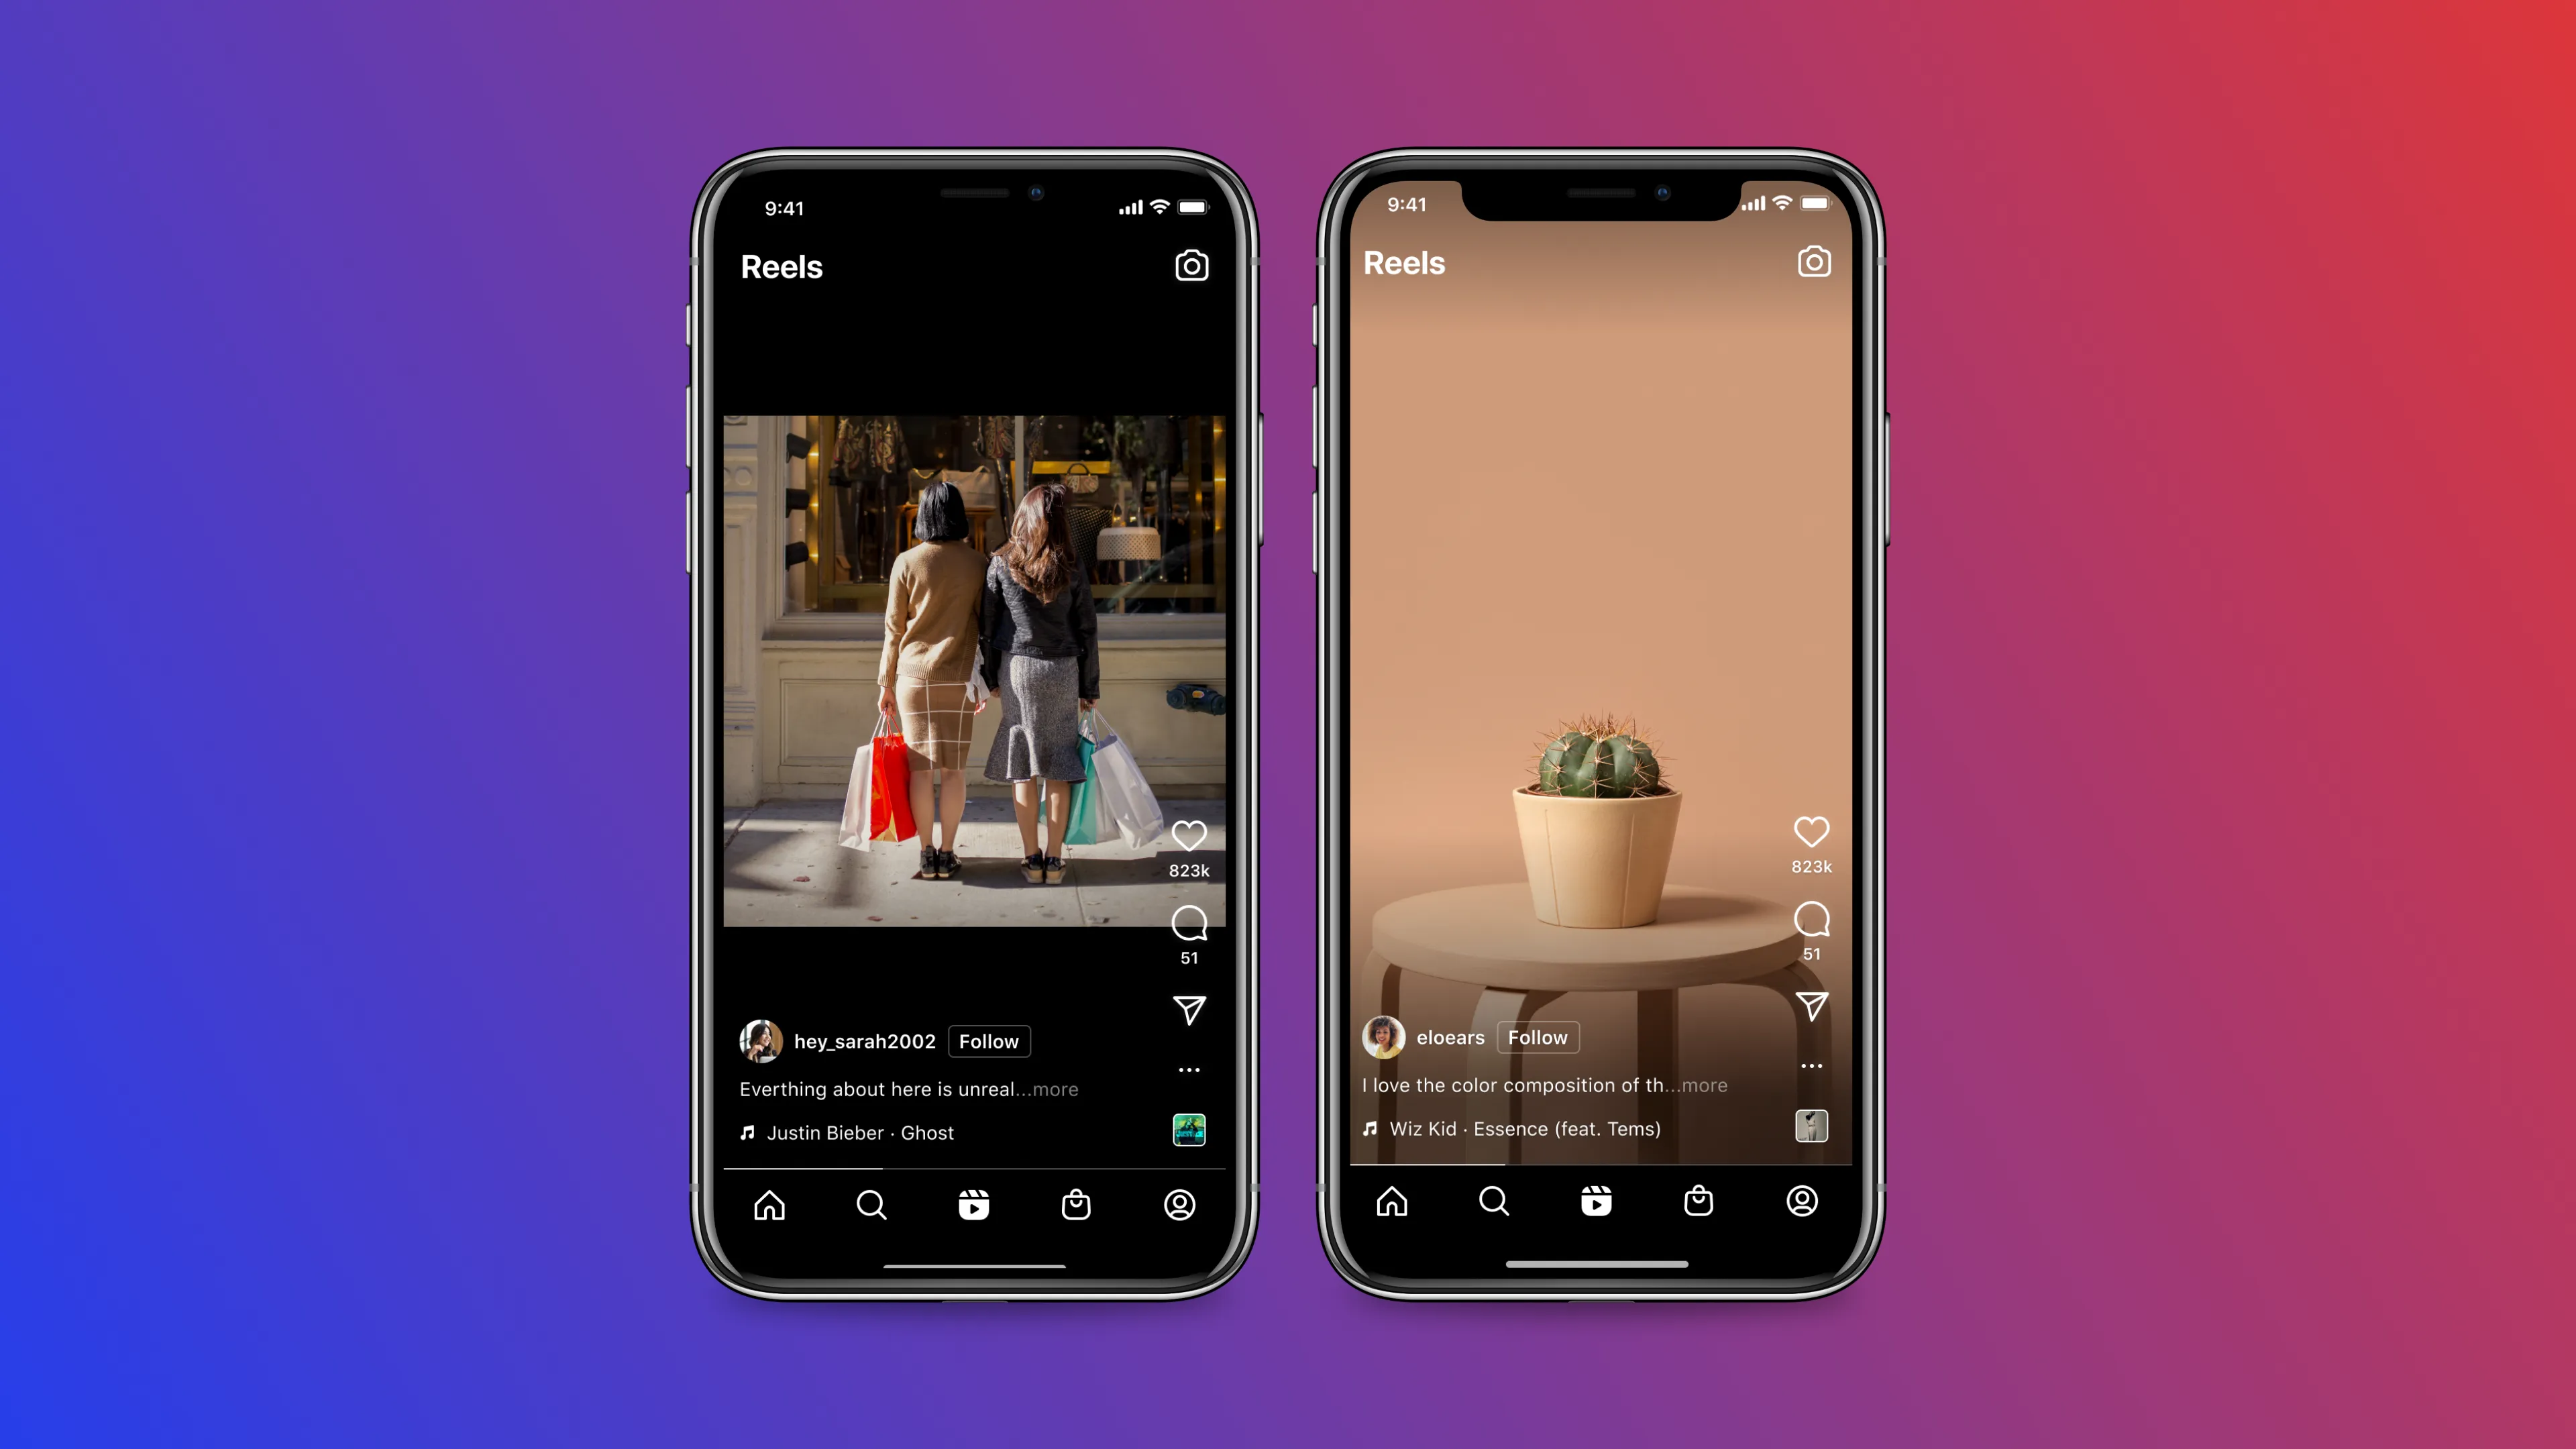 Marketing image featuring two device screenshots showcasing Instagram Reels on iPhone, set against a vibrant colorful background